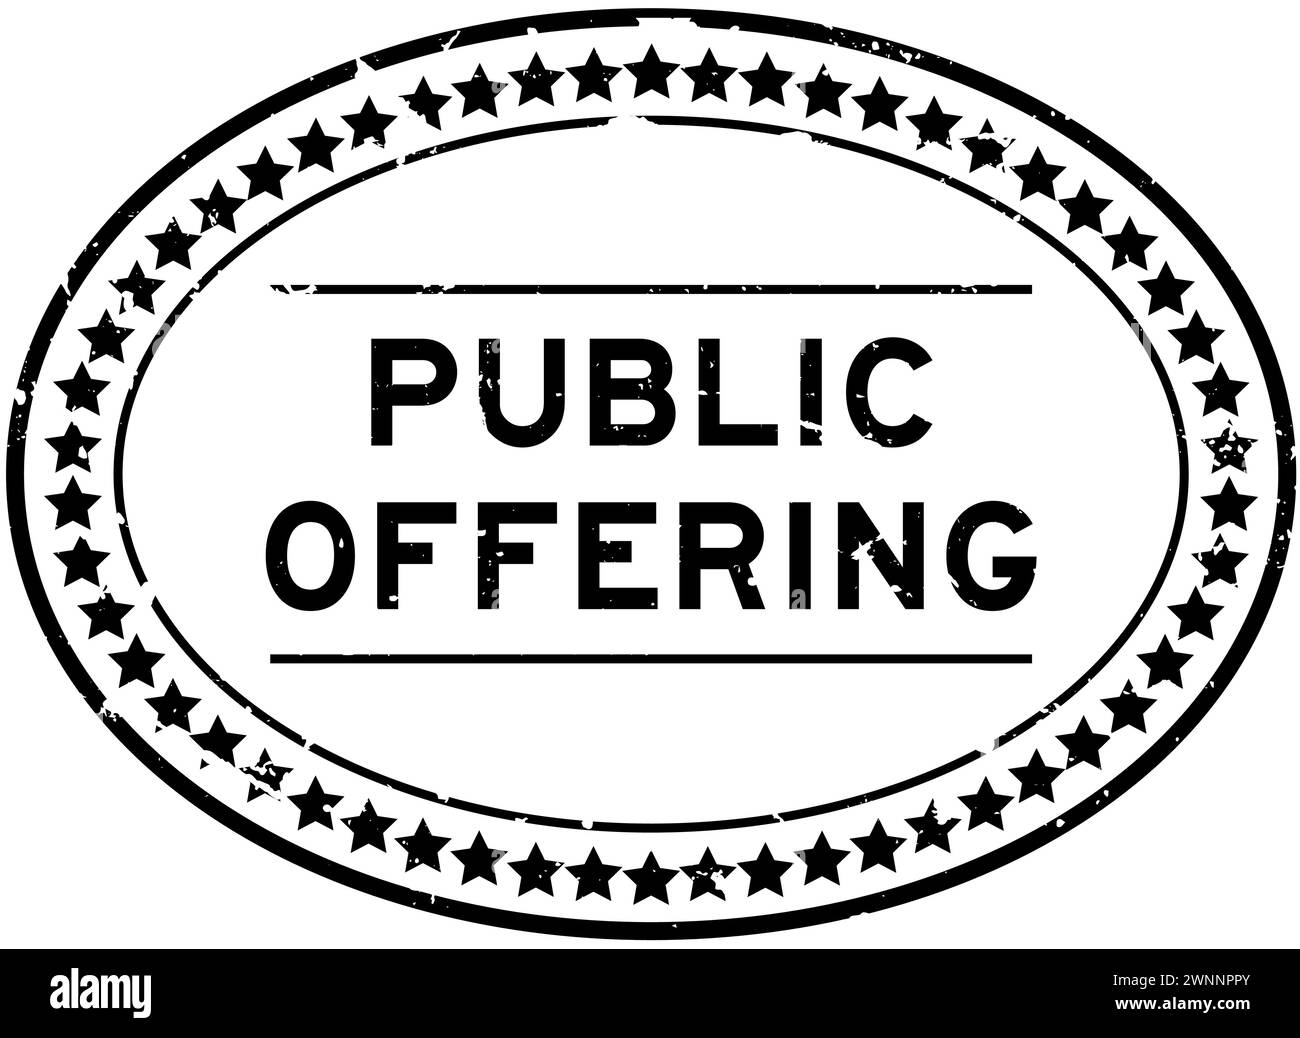 Grunge black public offering word oval seal stamp on white background Stock Vector